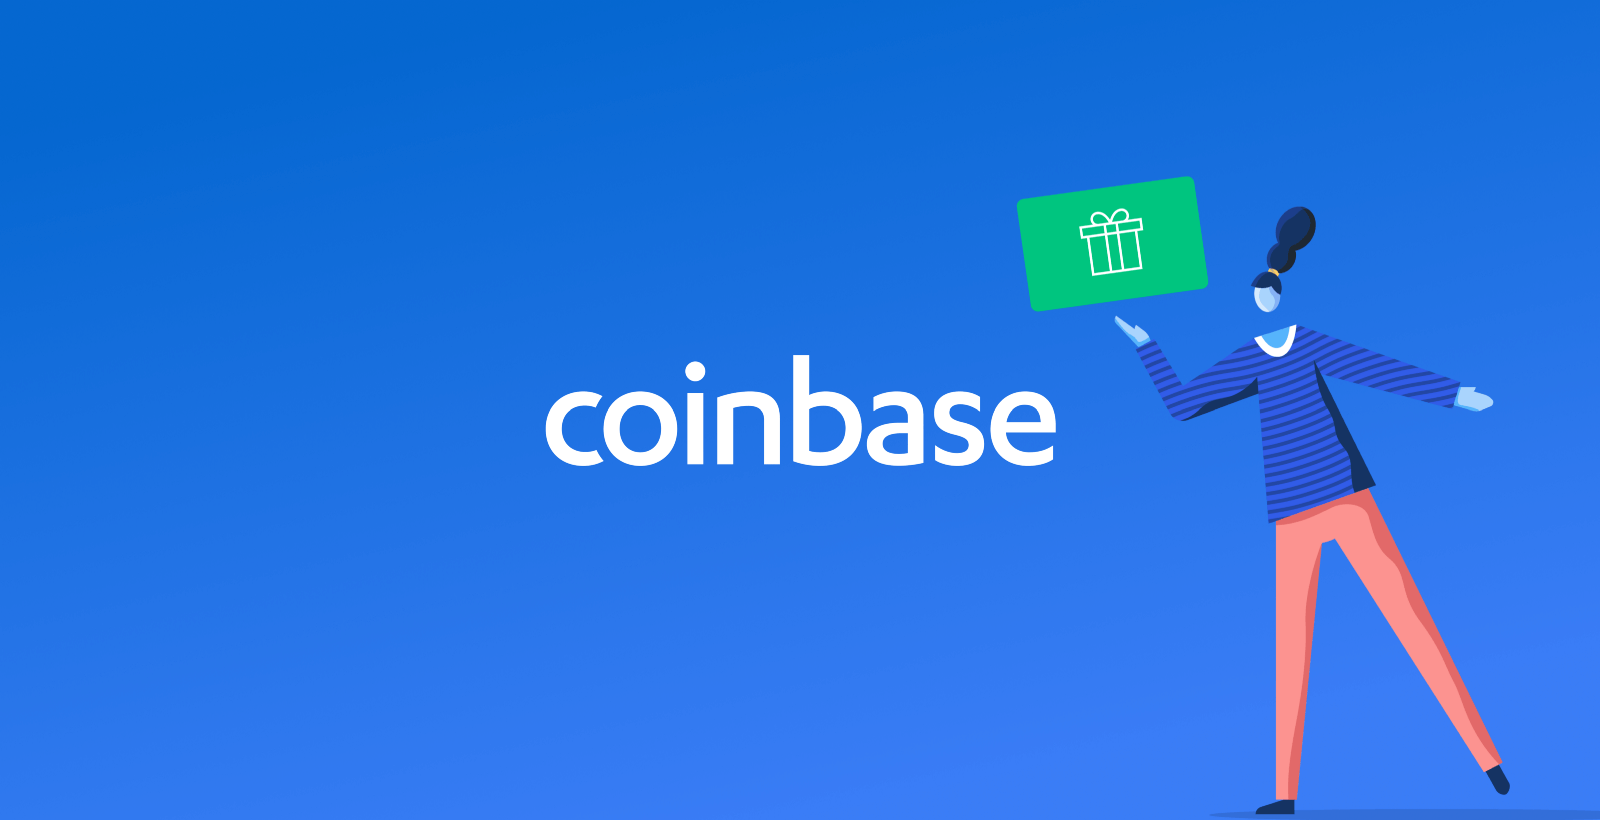 coinbase-has-announced-cryptocurrency-gift-card-the-blockchain-land